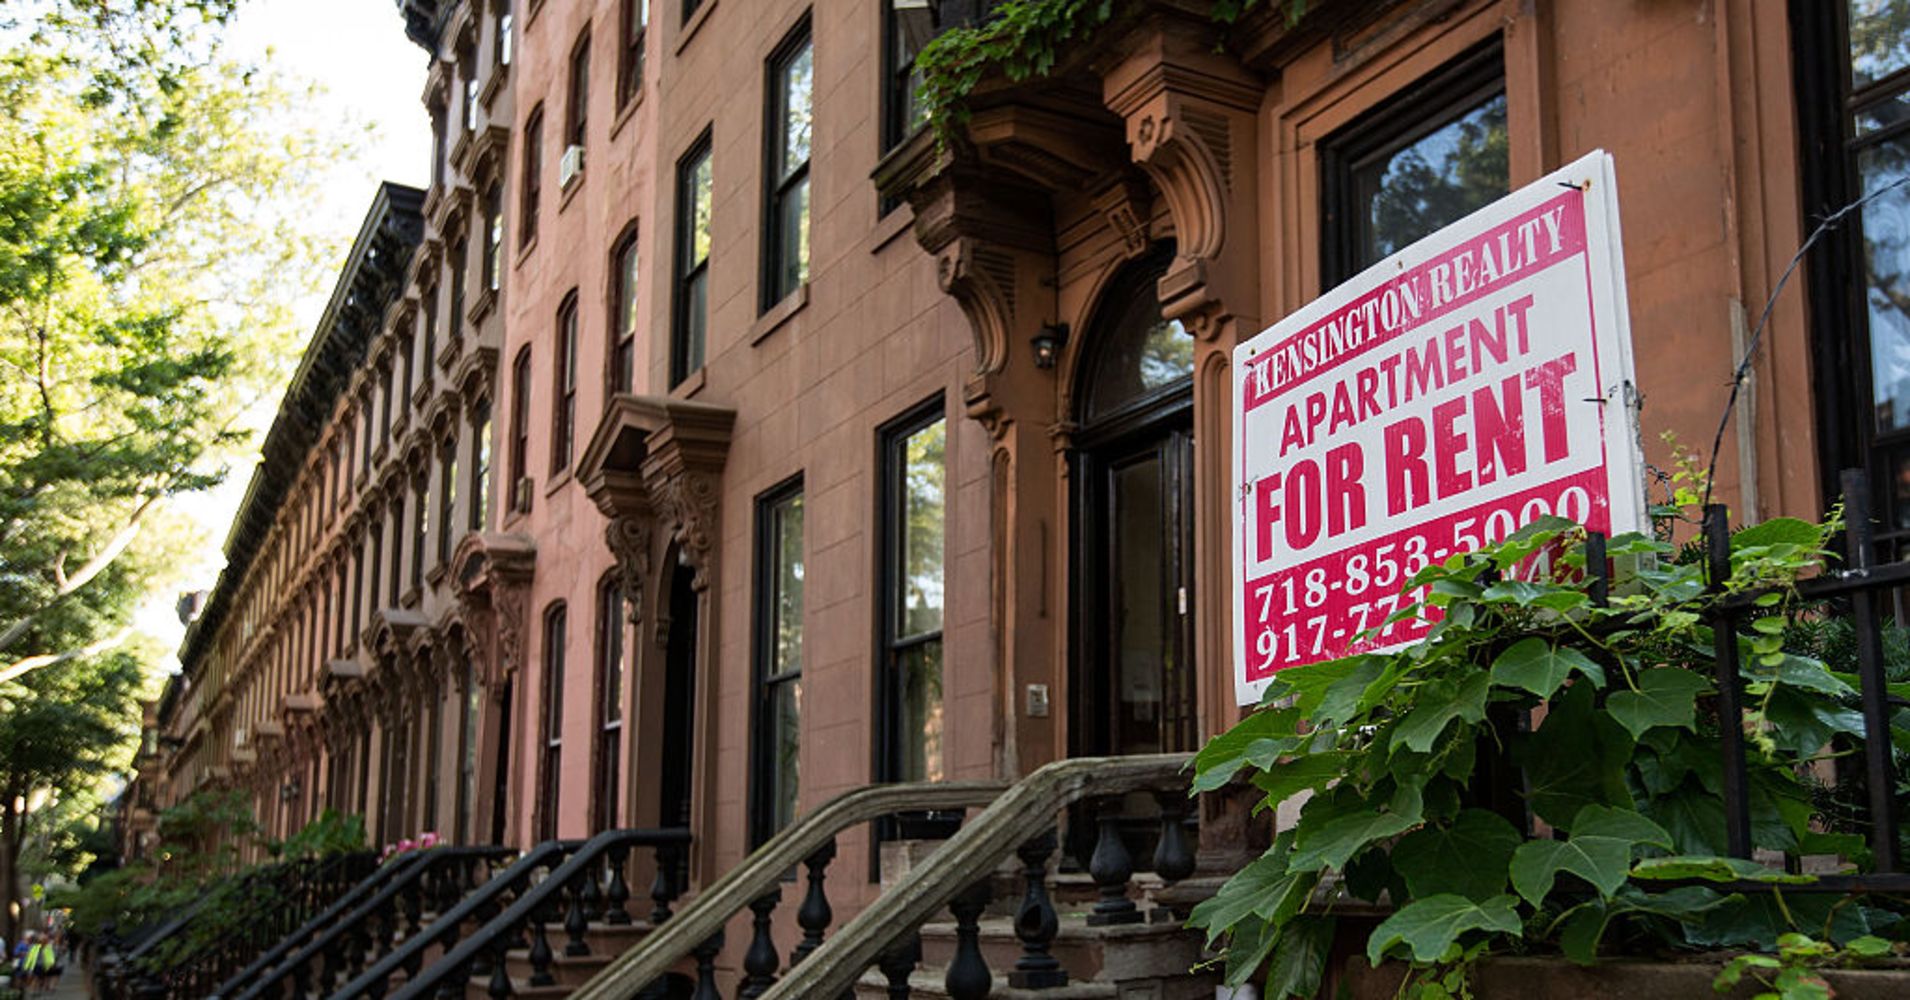 Apartment rents are suddenly rising faster, reversing year-long trend